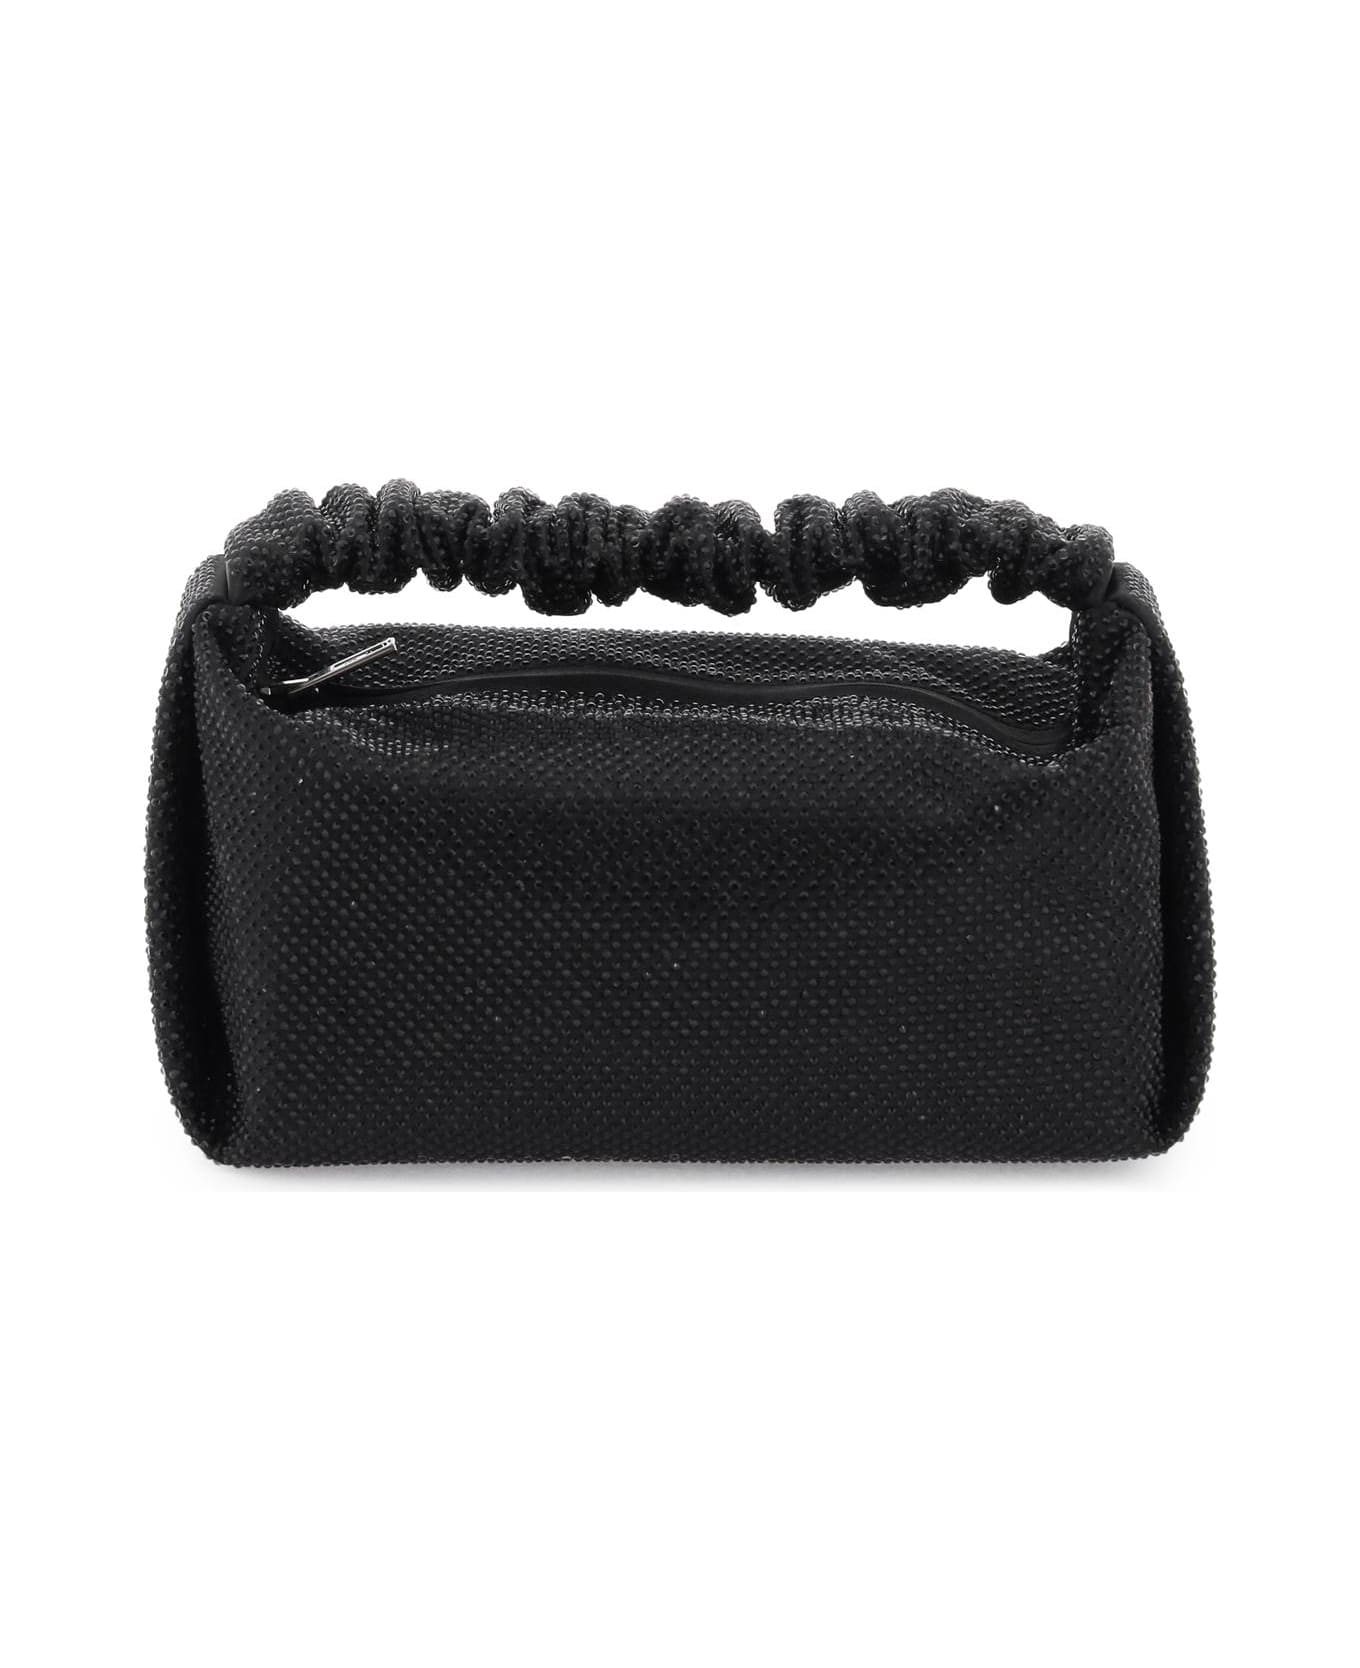 Alexander Wang Scrunchie Mini Bag With Crystals - Nero